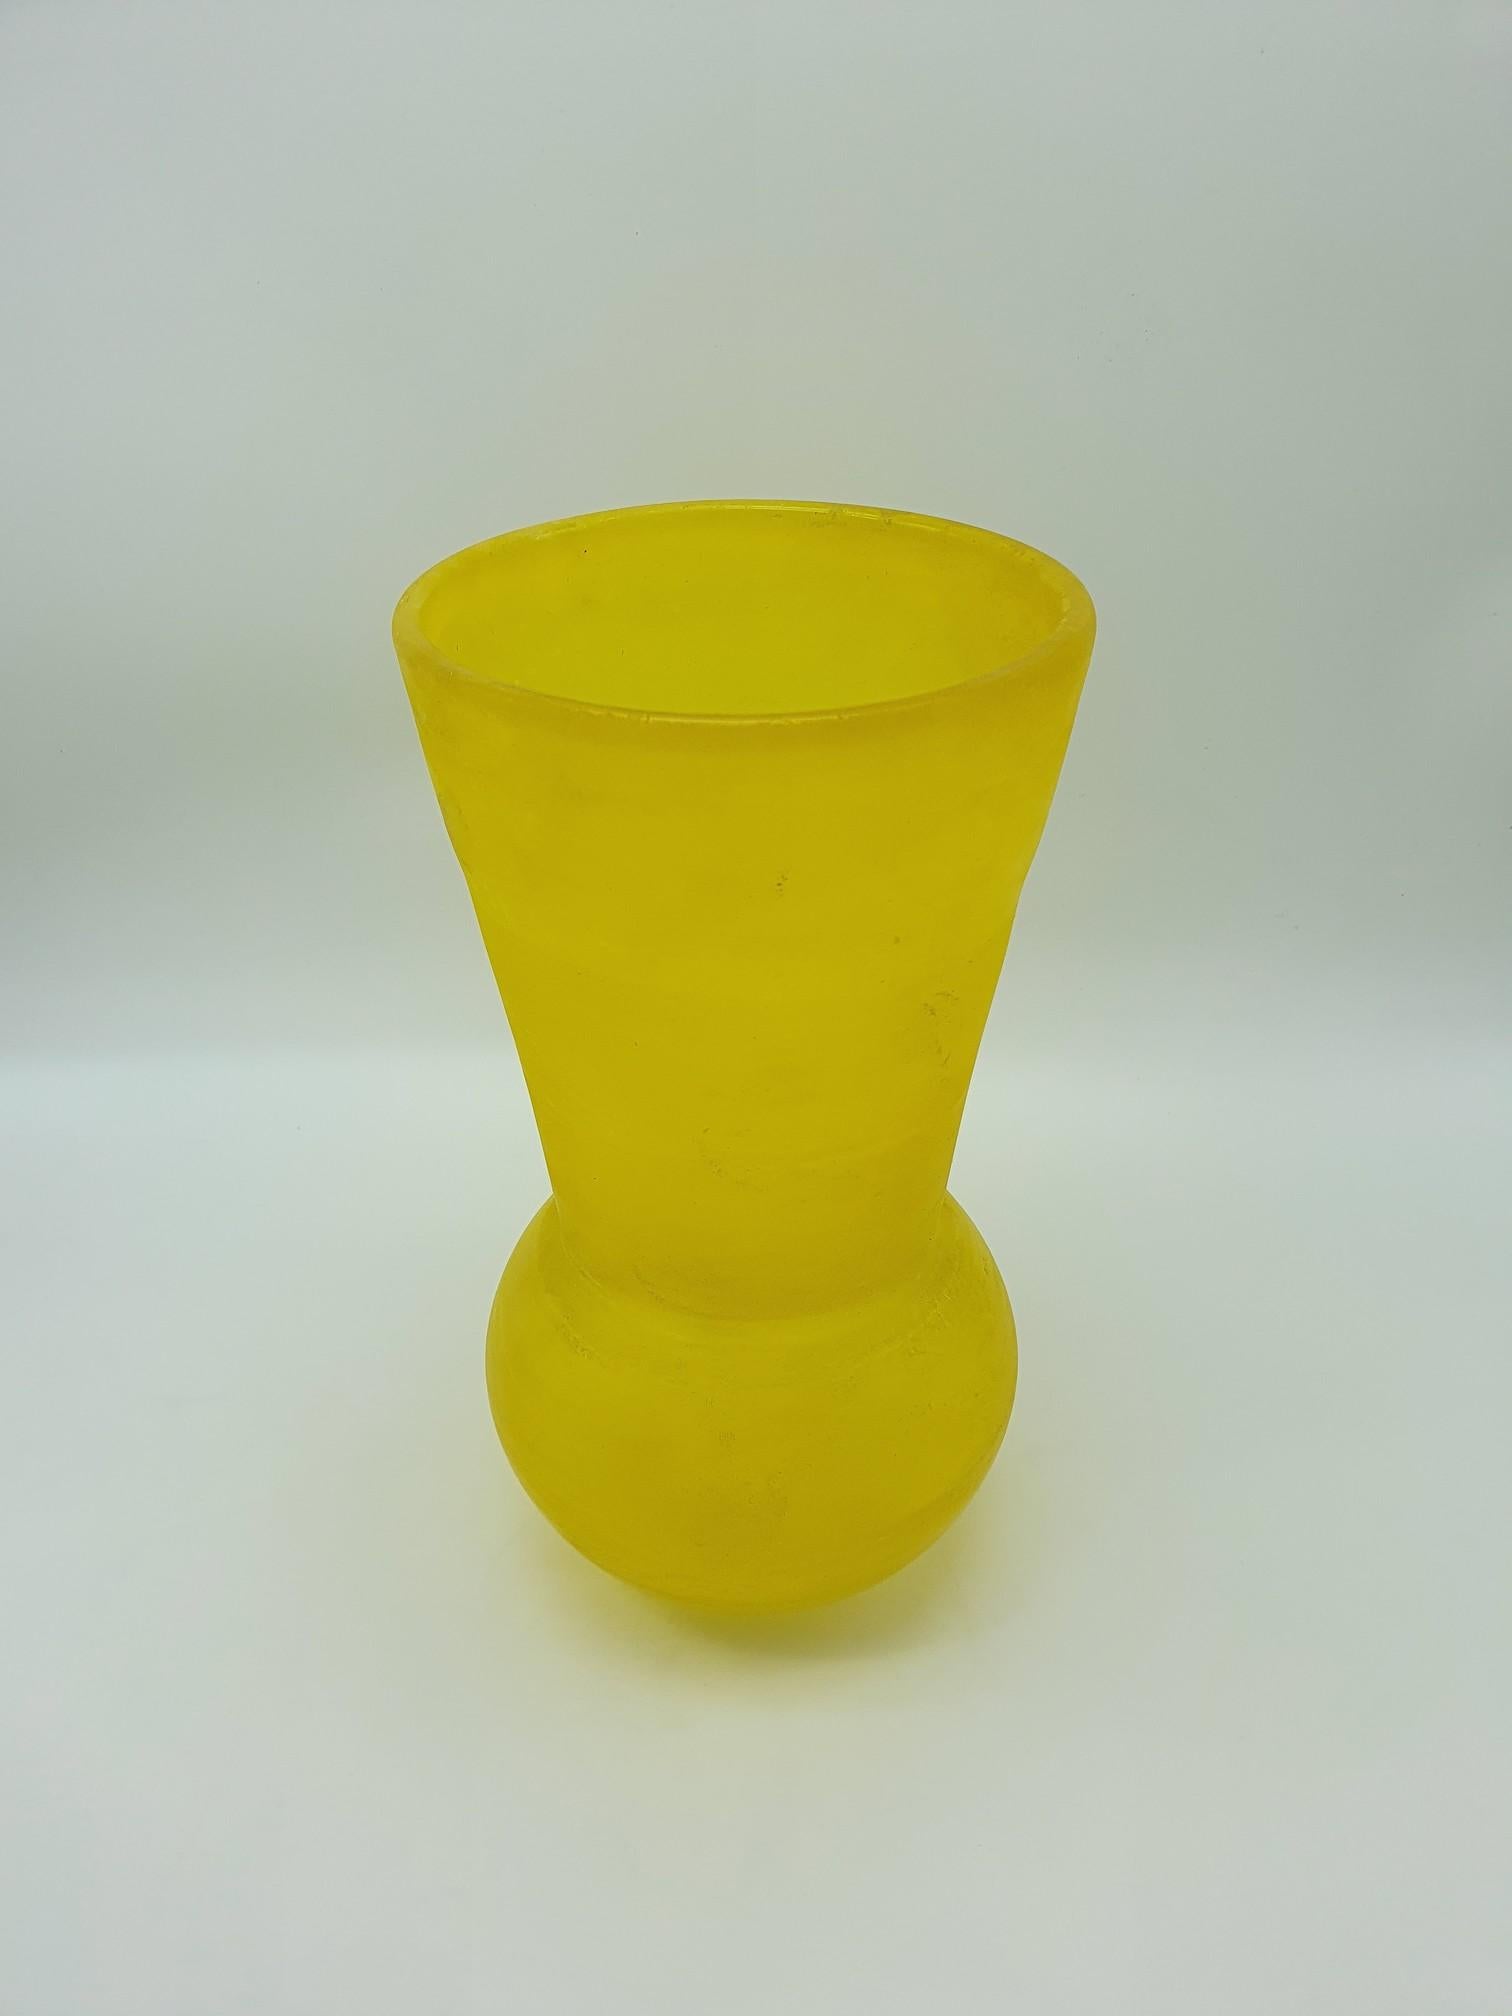 A yellow “scavo” glass vase by Gino Cenedese e Figlio, completely handmade in Murano in the mid-1980s. This modern vase is a refined example of simplicity in design, distinctive of all items in the Cenedese’s “scavo” collection. This piece features